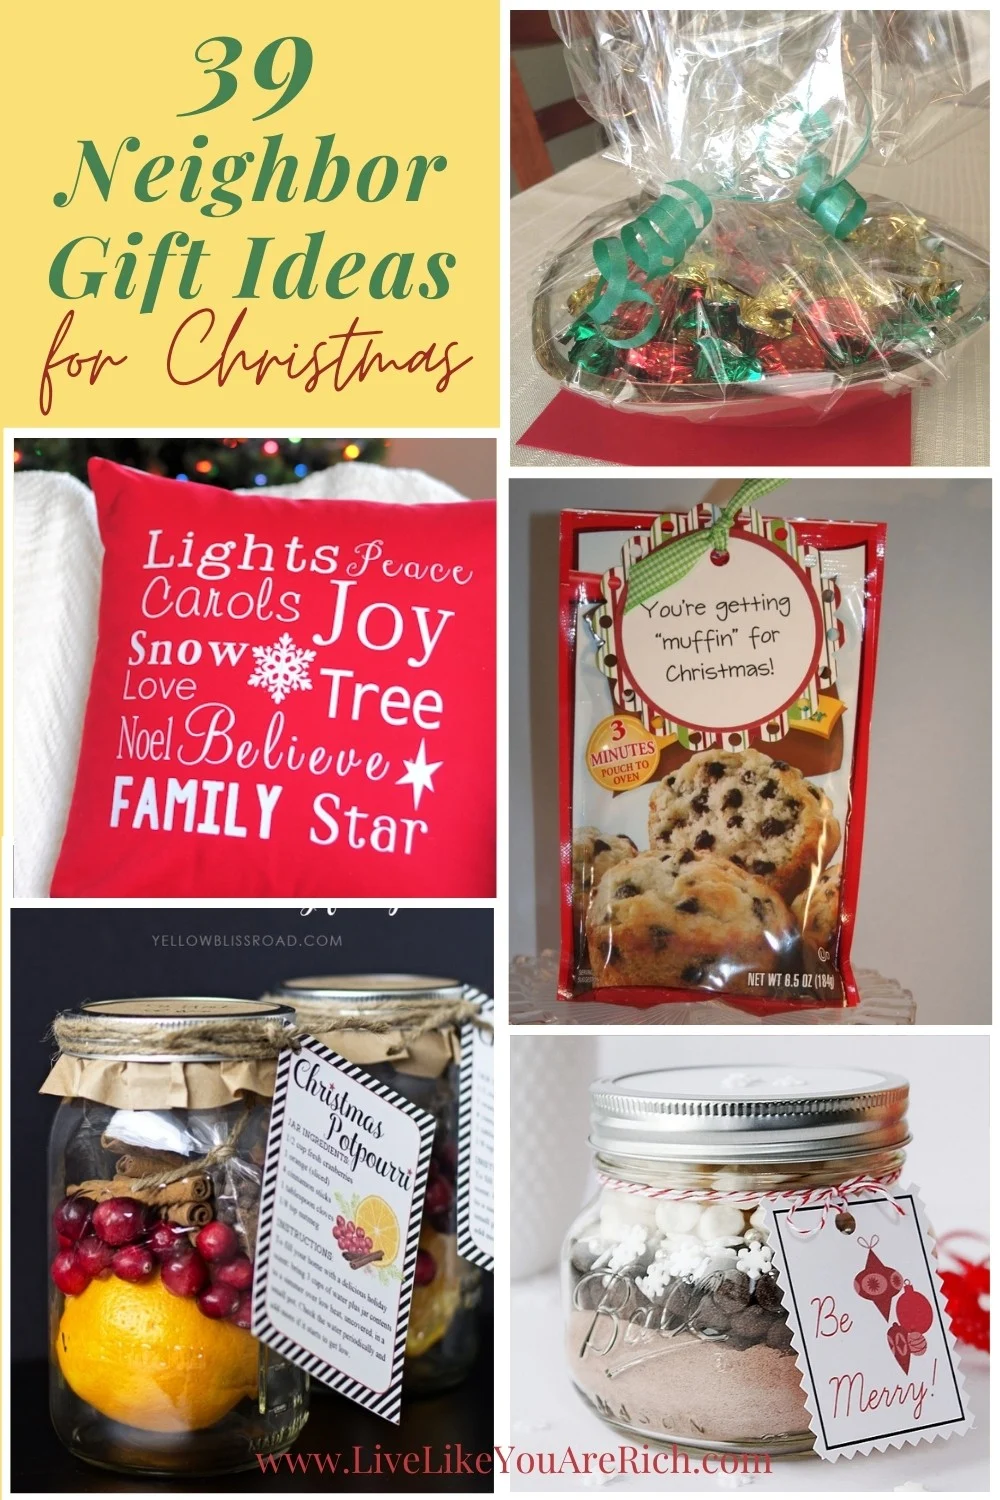 Looking for Christmas gift ideas for your neighbors? Neighbor gifts are always nice to give and receive. In the past few years, I’ve really enjoyed giving gifts to those people who mean a lot to my family. Although I love gift giving, for budgeting and time purposes I have to be sure that I’m giving out inexpensive and quick neighbor gifts. Here are some ideas I liked that I thought I would share with you.